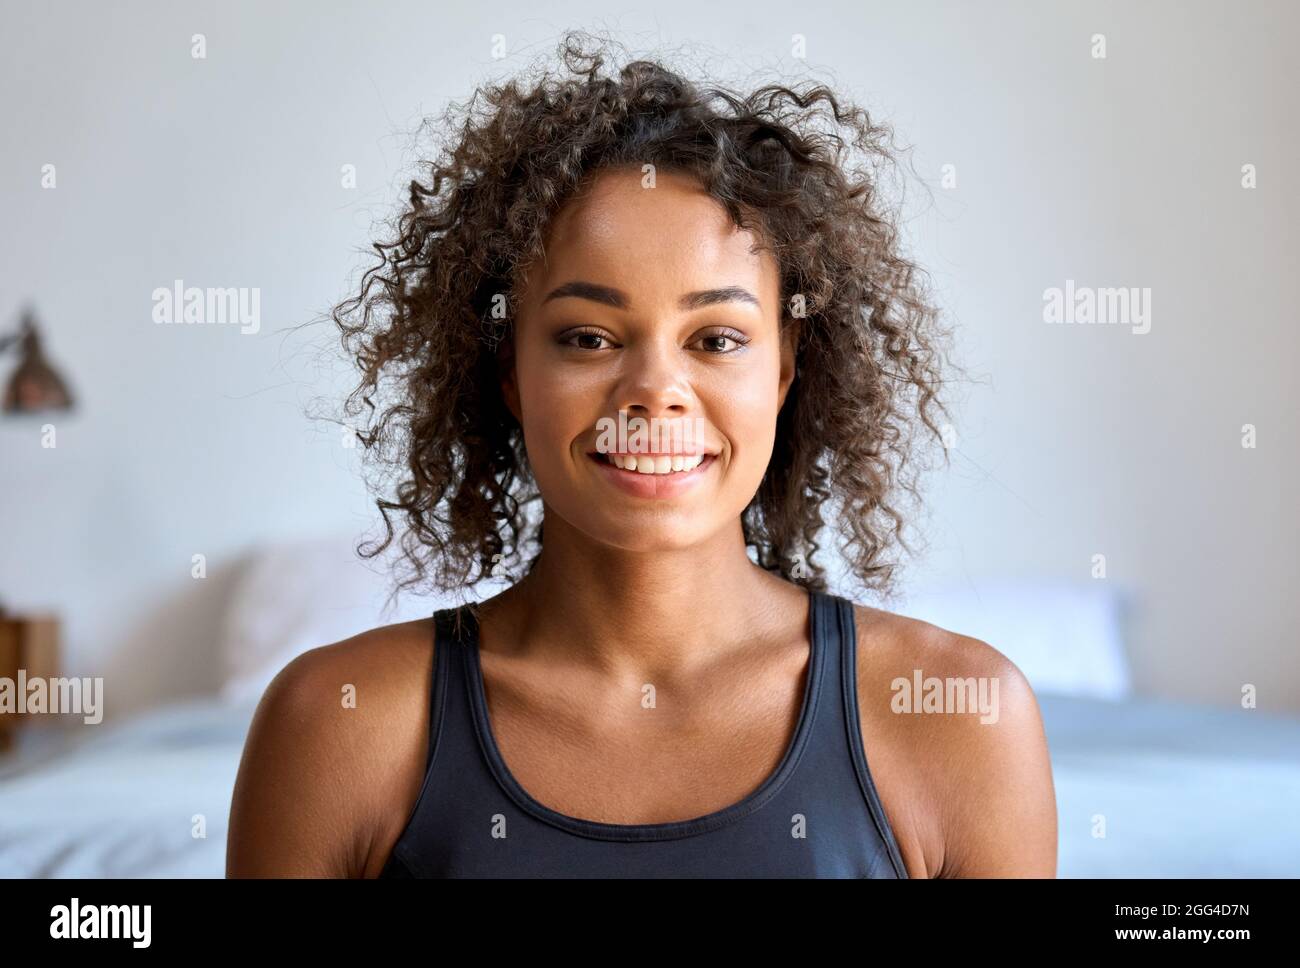 Headshot portrait of young mixed raced woman looking at camera indoors. Stock Photo